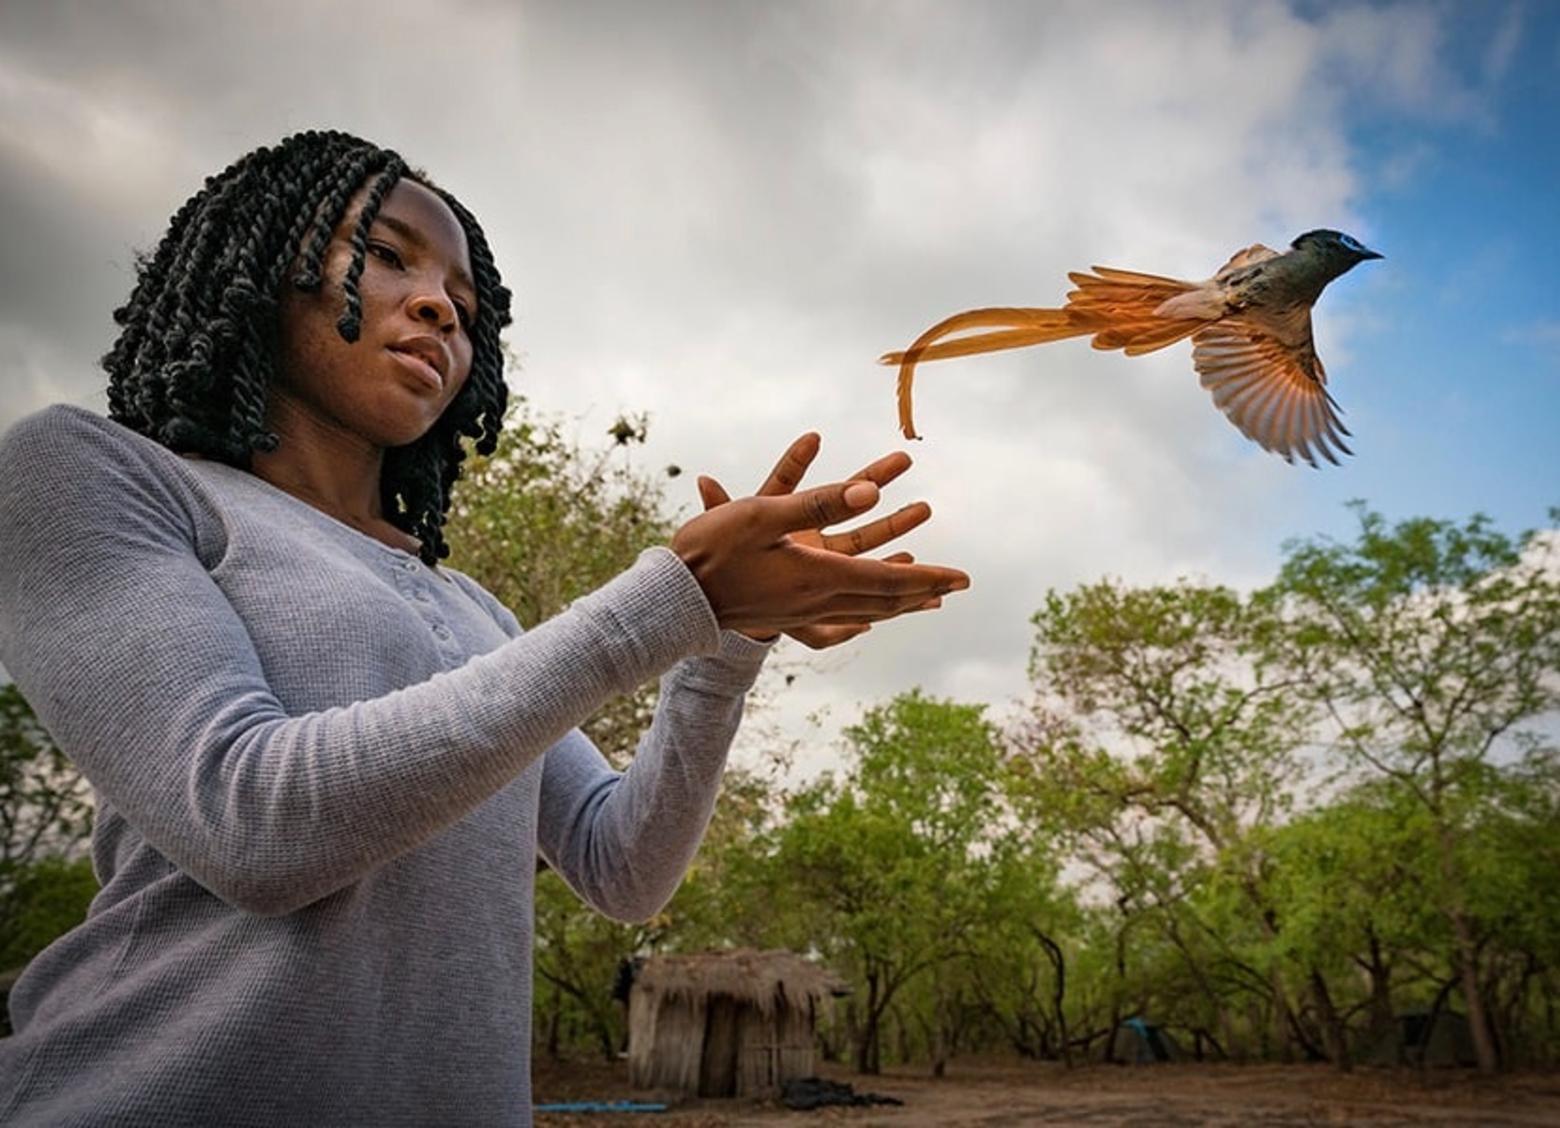 Rosa Tivane releases a paradise flycatcher in Gorongosa National Park. The restoration of wildlife that has happened in Gorongosa is unprecedented in the modern world and a hopeful indicator of nature's resilience. For young people like Rosa, who is learning about biodiversity, Gorongosa represents a vital touchstone in a new and growing national identity. Photo courtesy Gorongosa National Park